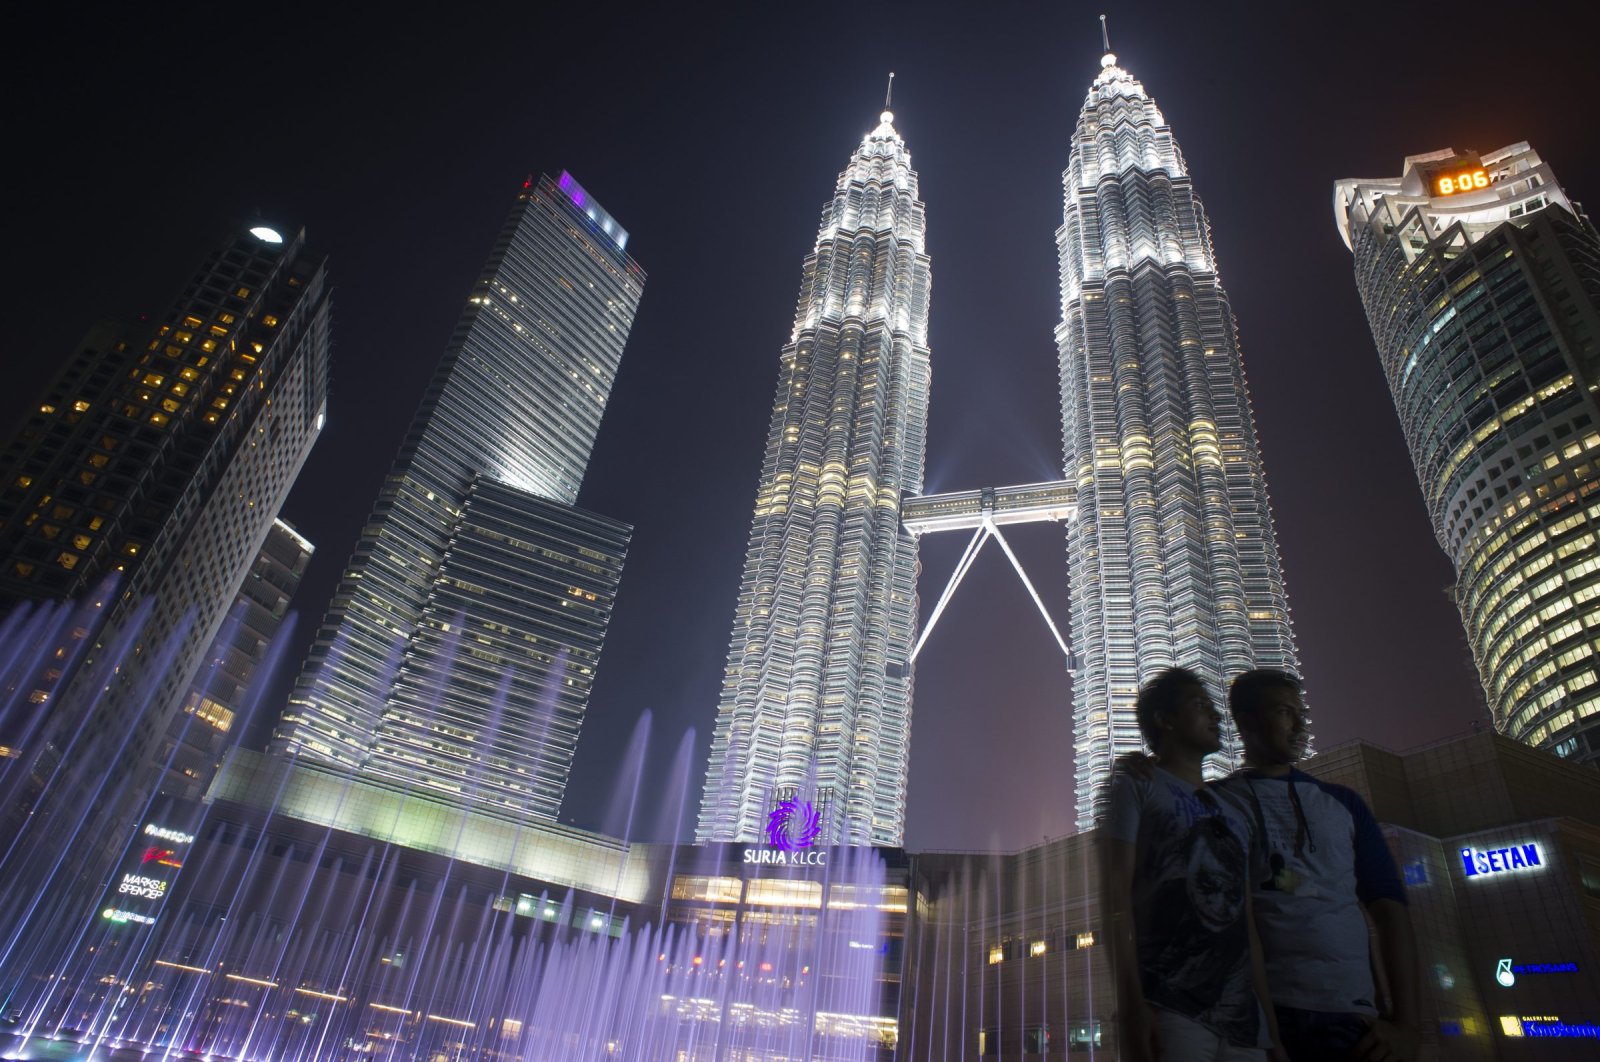 Tourists have their photograph taken in front of the Petronas Twin Towers in Kuala Lumpur, Malaysia, March 10, 2015. (AP Photo)